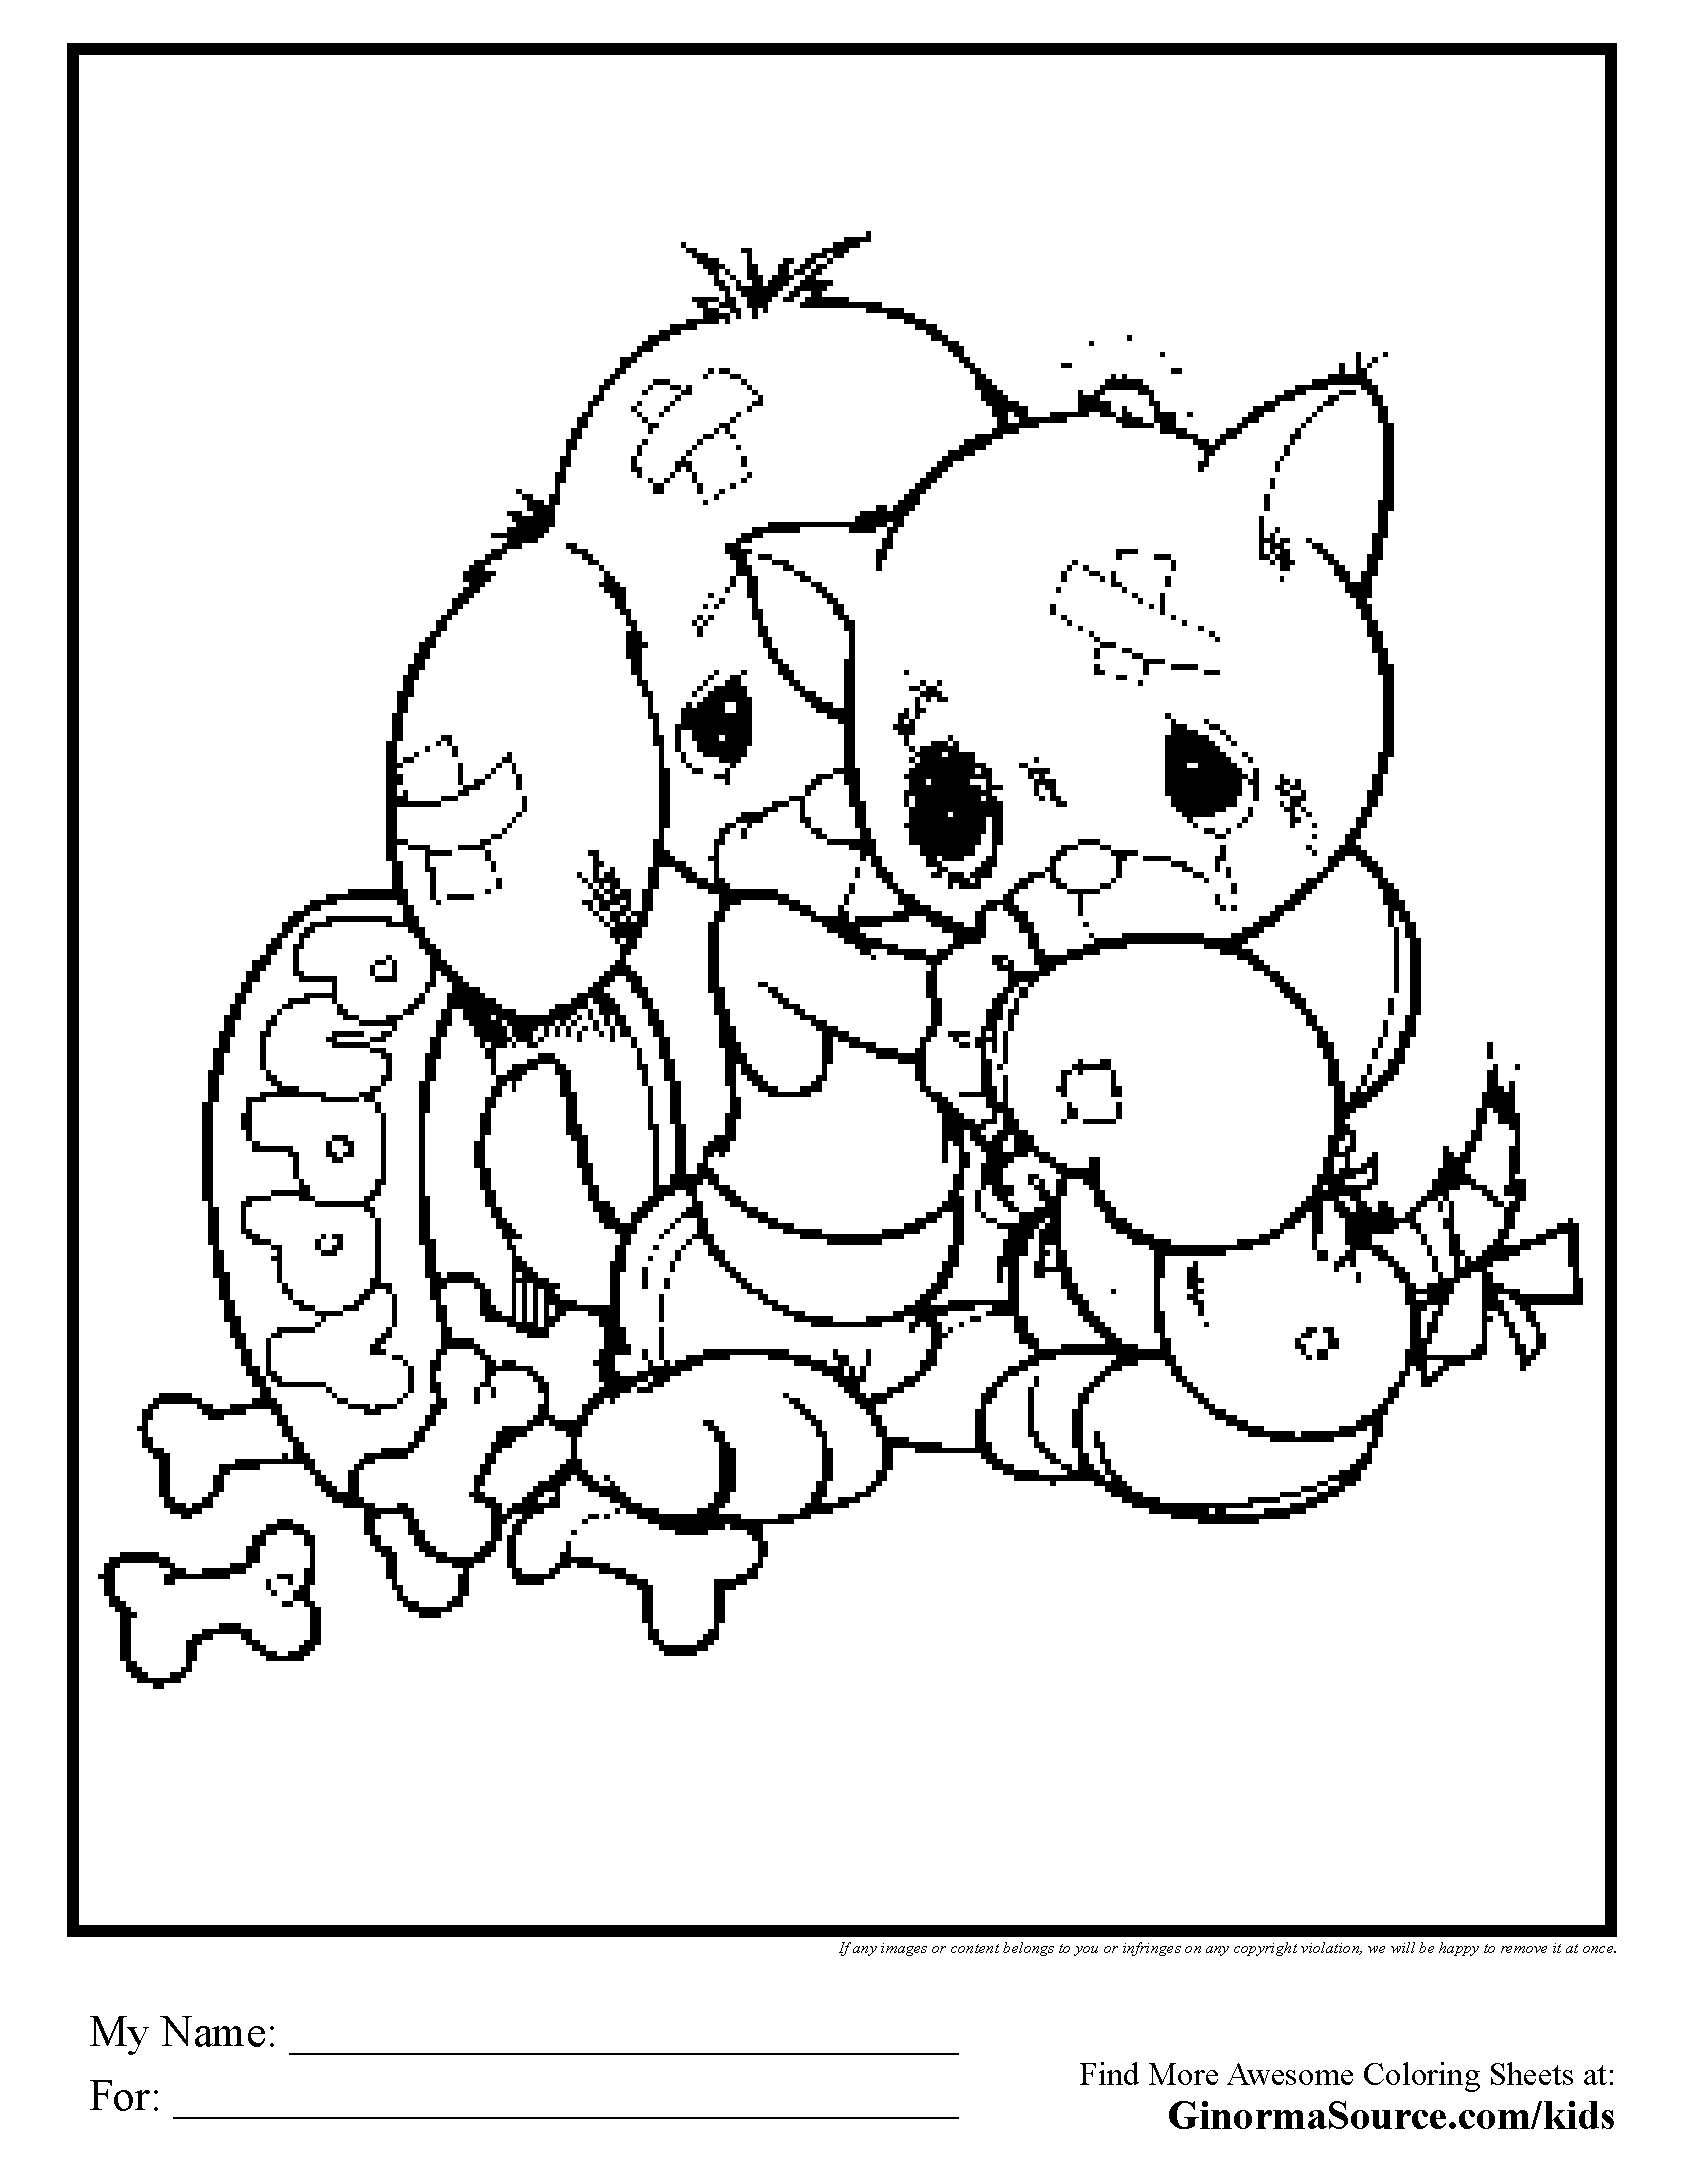 puppy-and-kitty-coloring-pages | www.pavingmaze.com